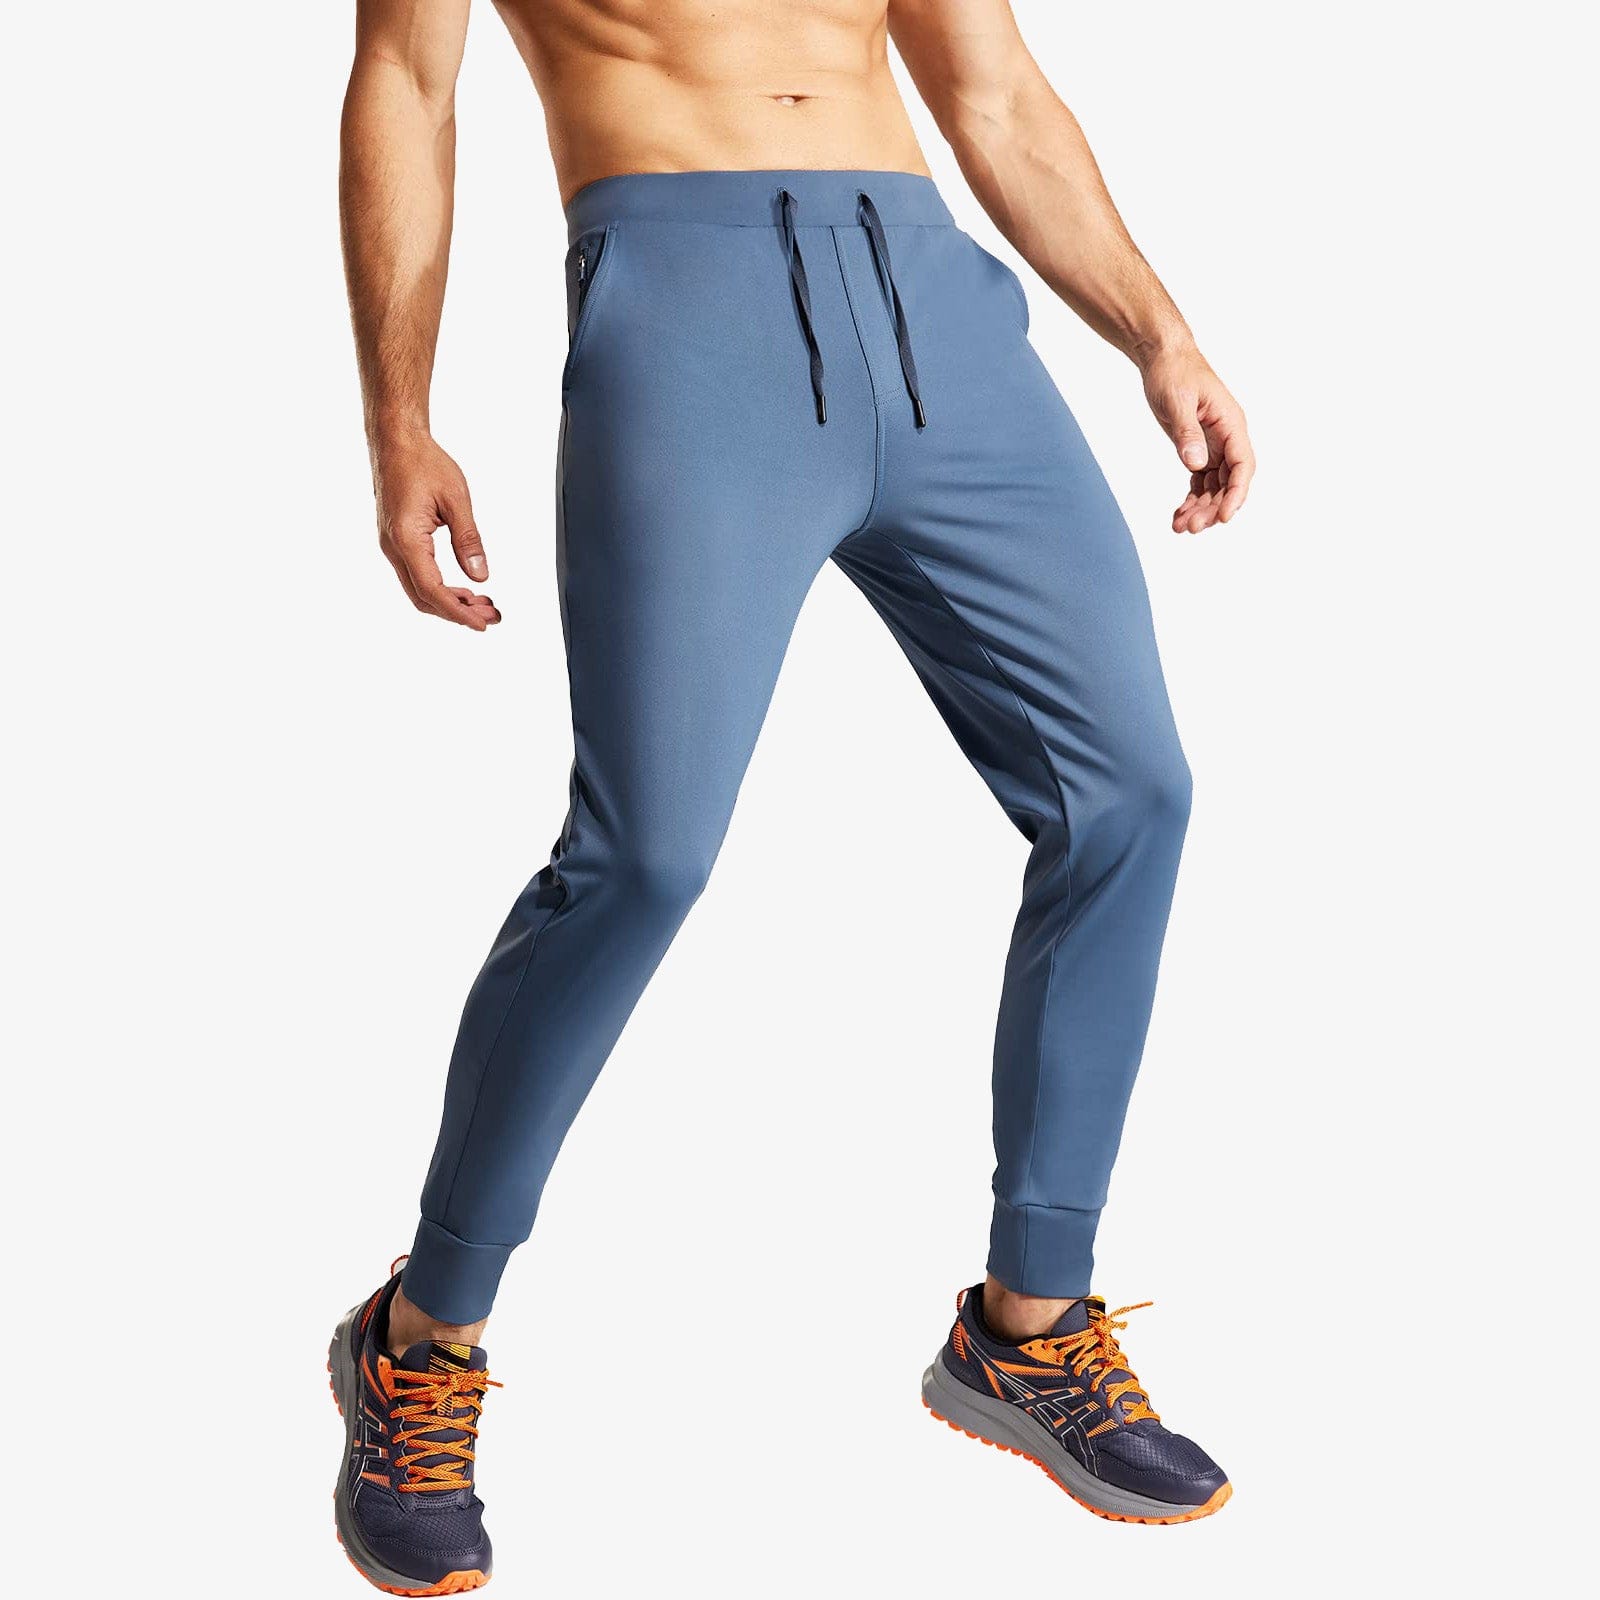 Men's Navy Blue Light Weight Stretchy Slim Fit Stylish Printed Track Pants,  Sports Lower for Gym